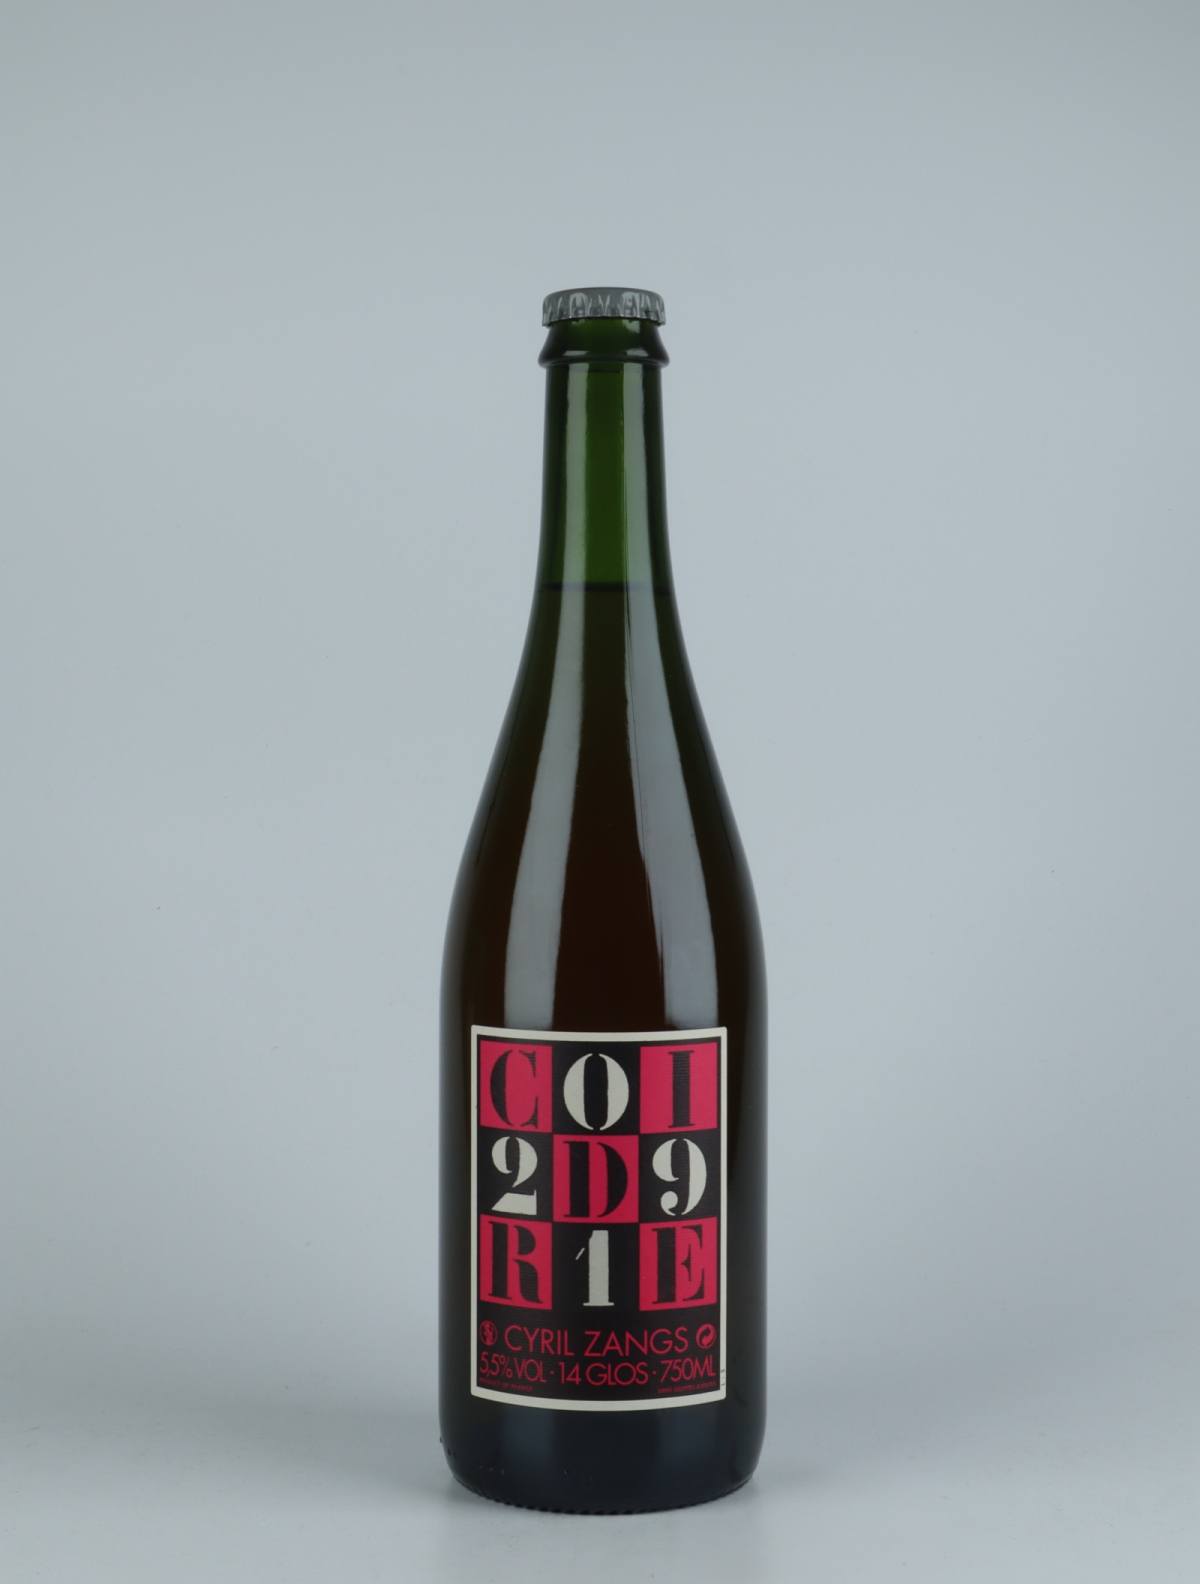 A bottle 2019 Cidre Brut Cider from Cyril Zangs, Normandy in France